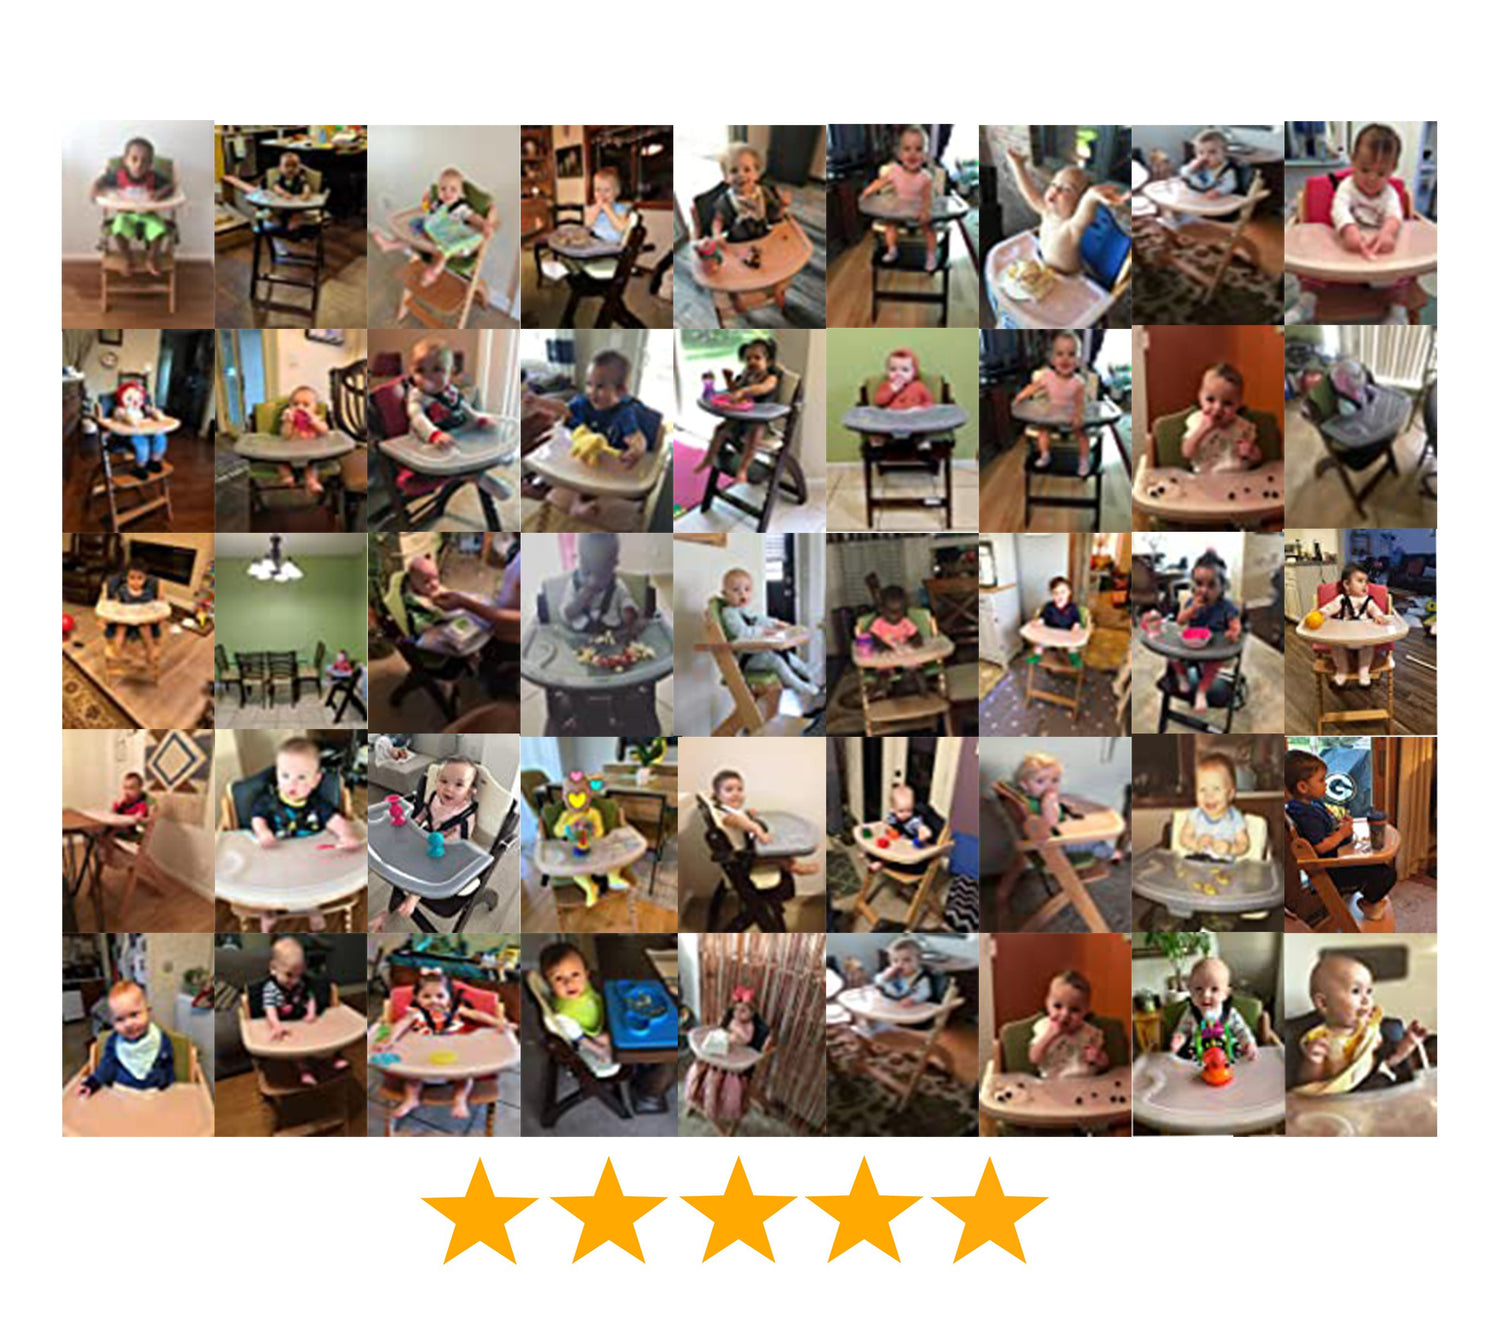  Beyond Junior Y High Chair  Review 